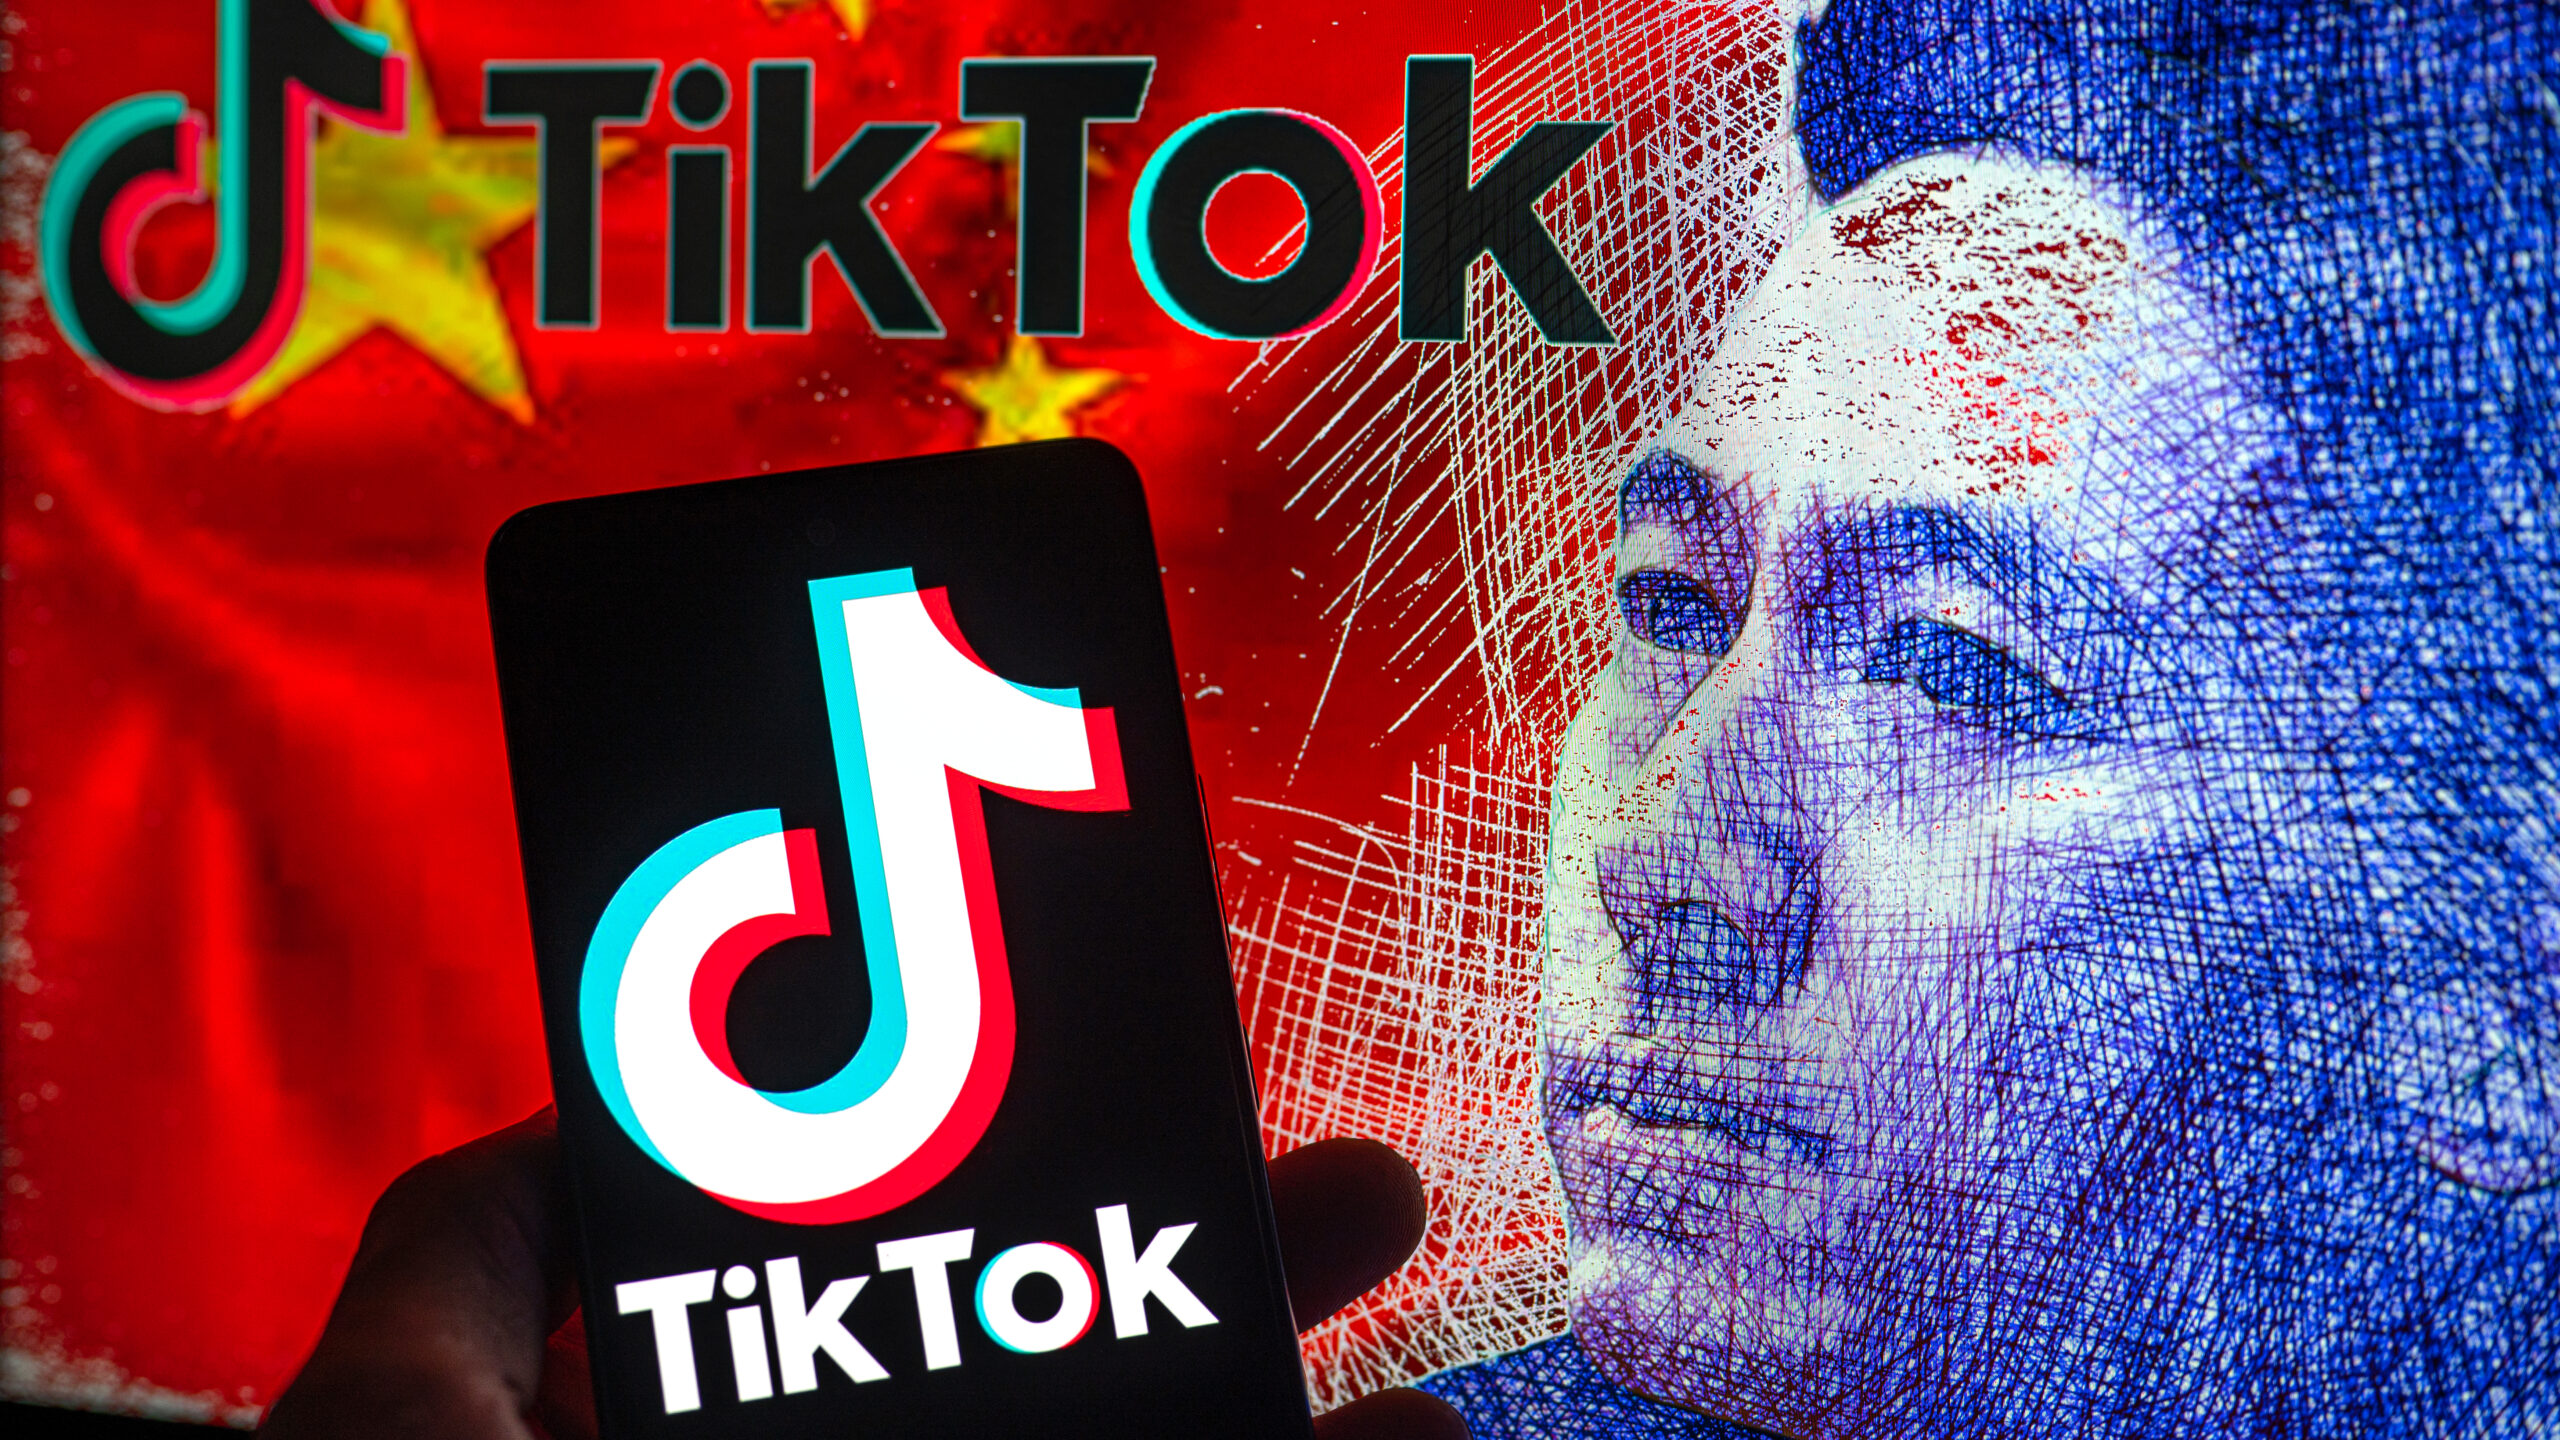 TikTok Rages After U.S. Passes Law Requiring Its Sale From Chinese Parent Company